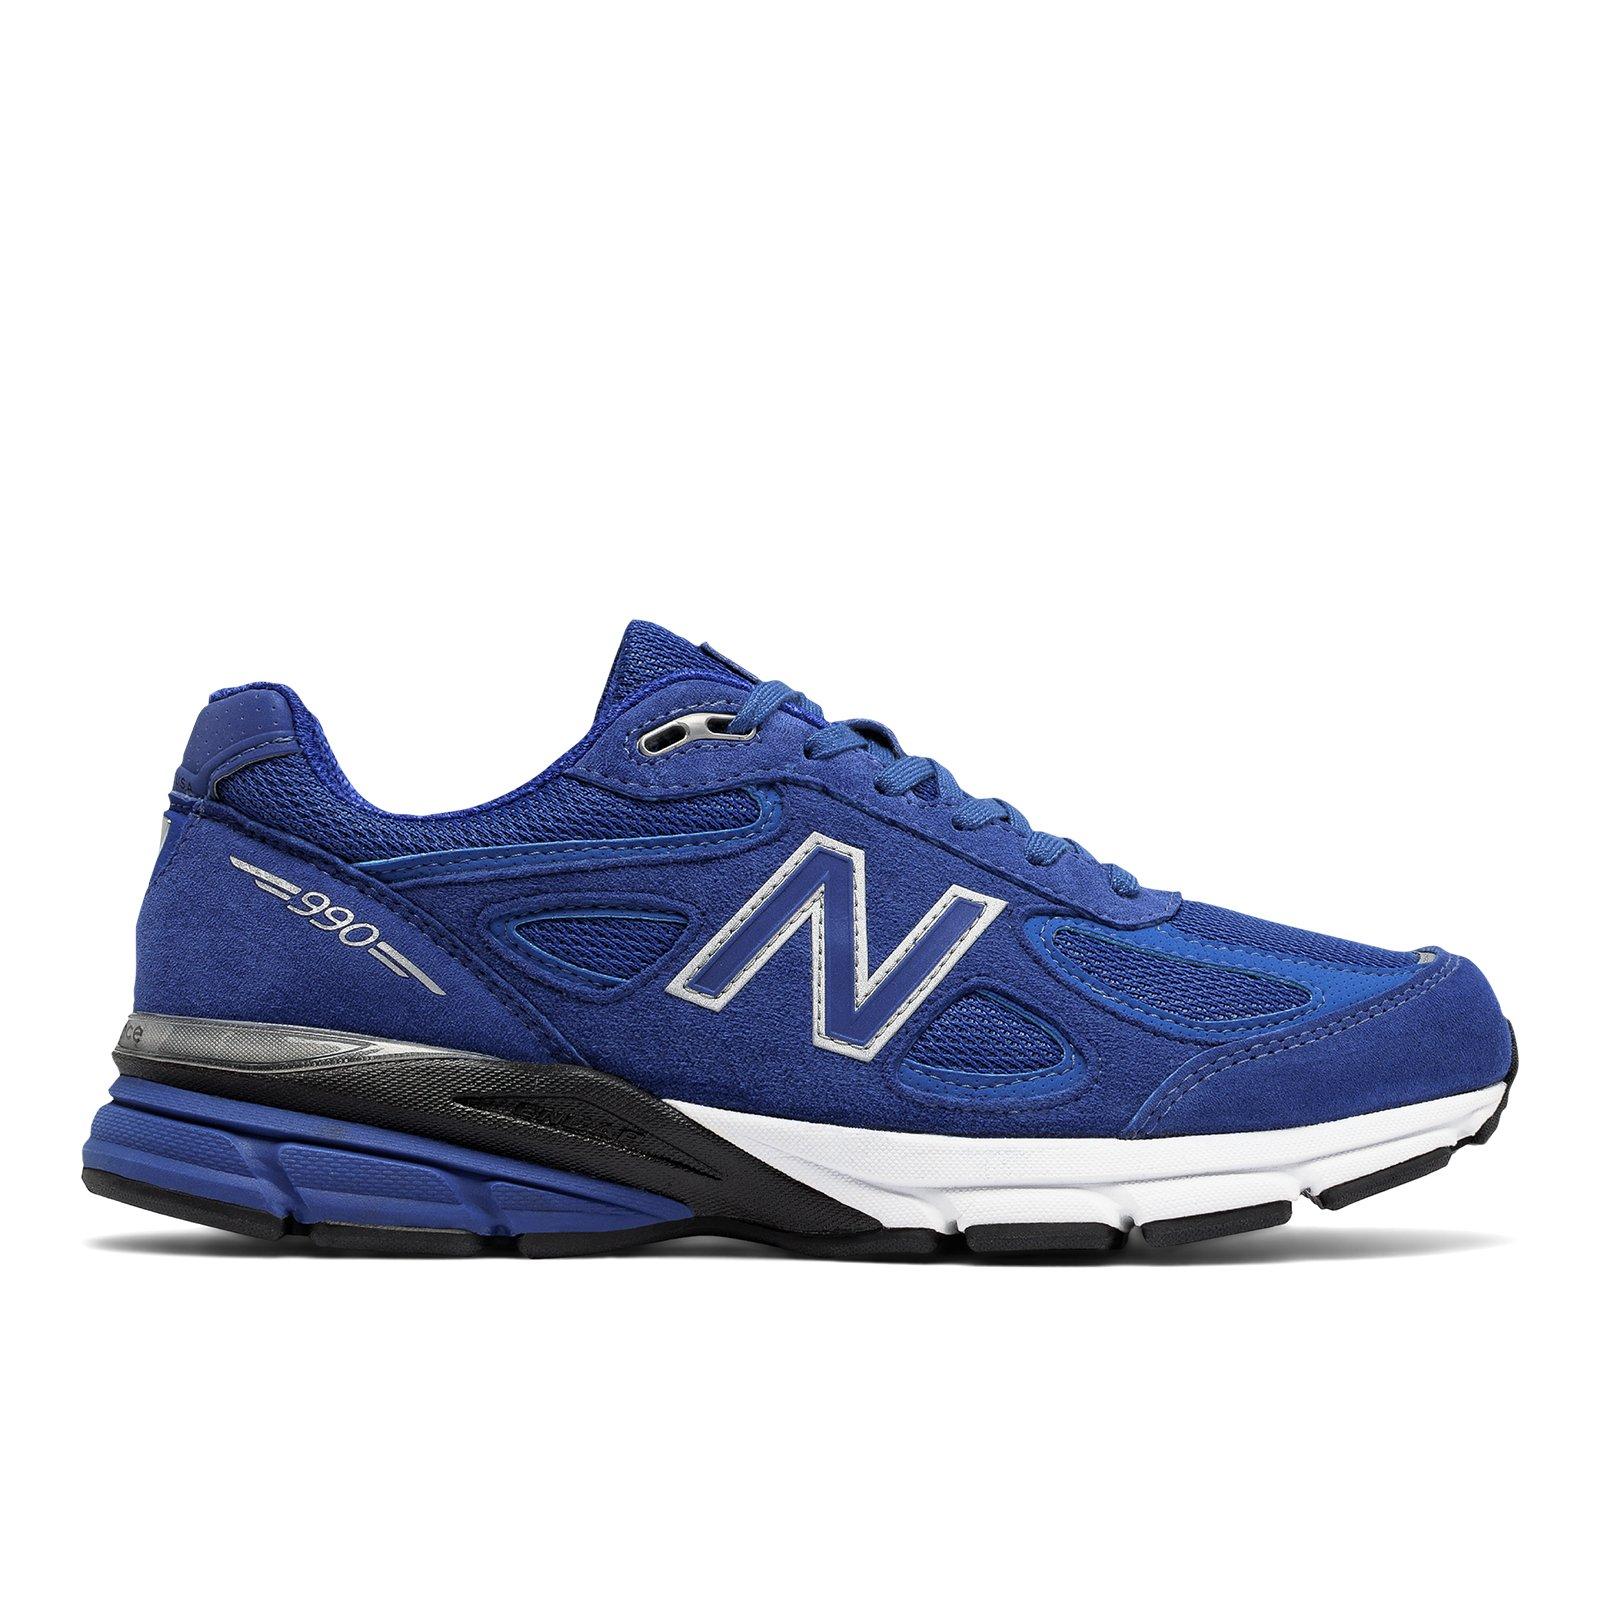 New Balance 990 v4 Men\u0027s Running Shoes - Main Container Image 1